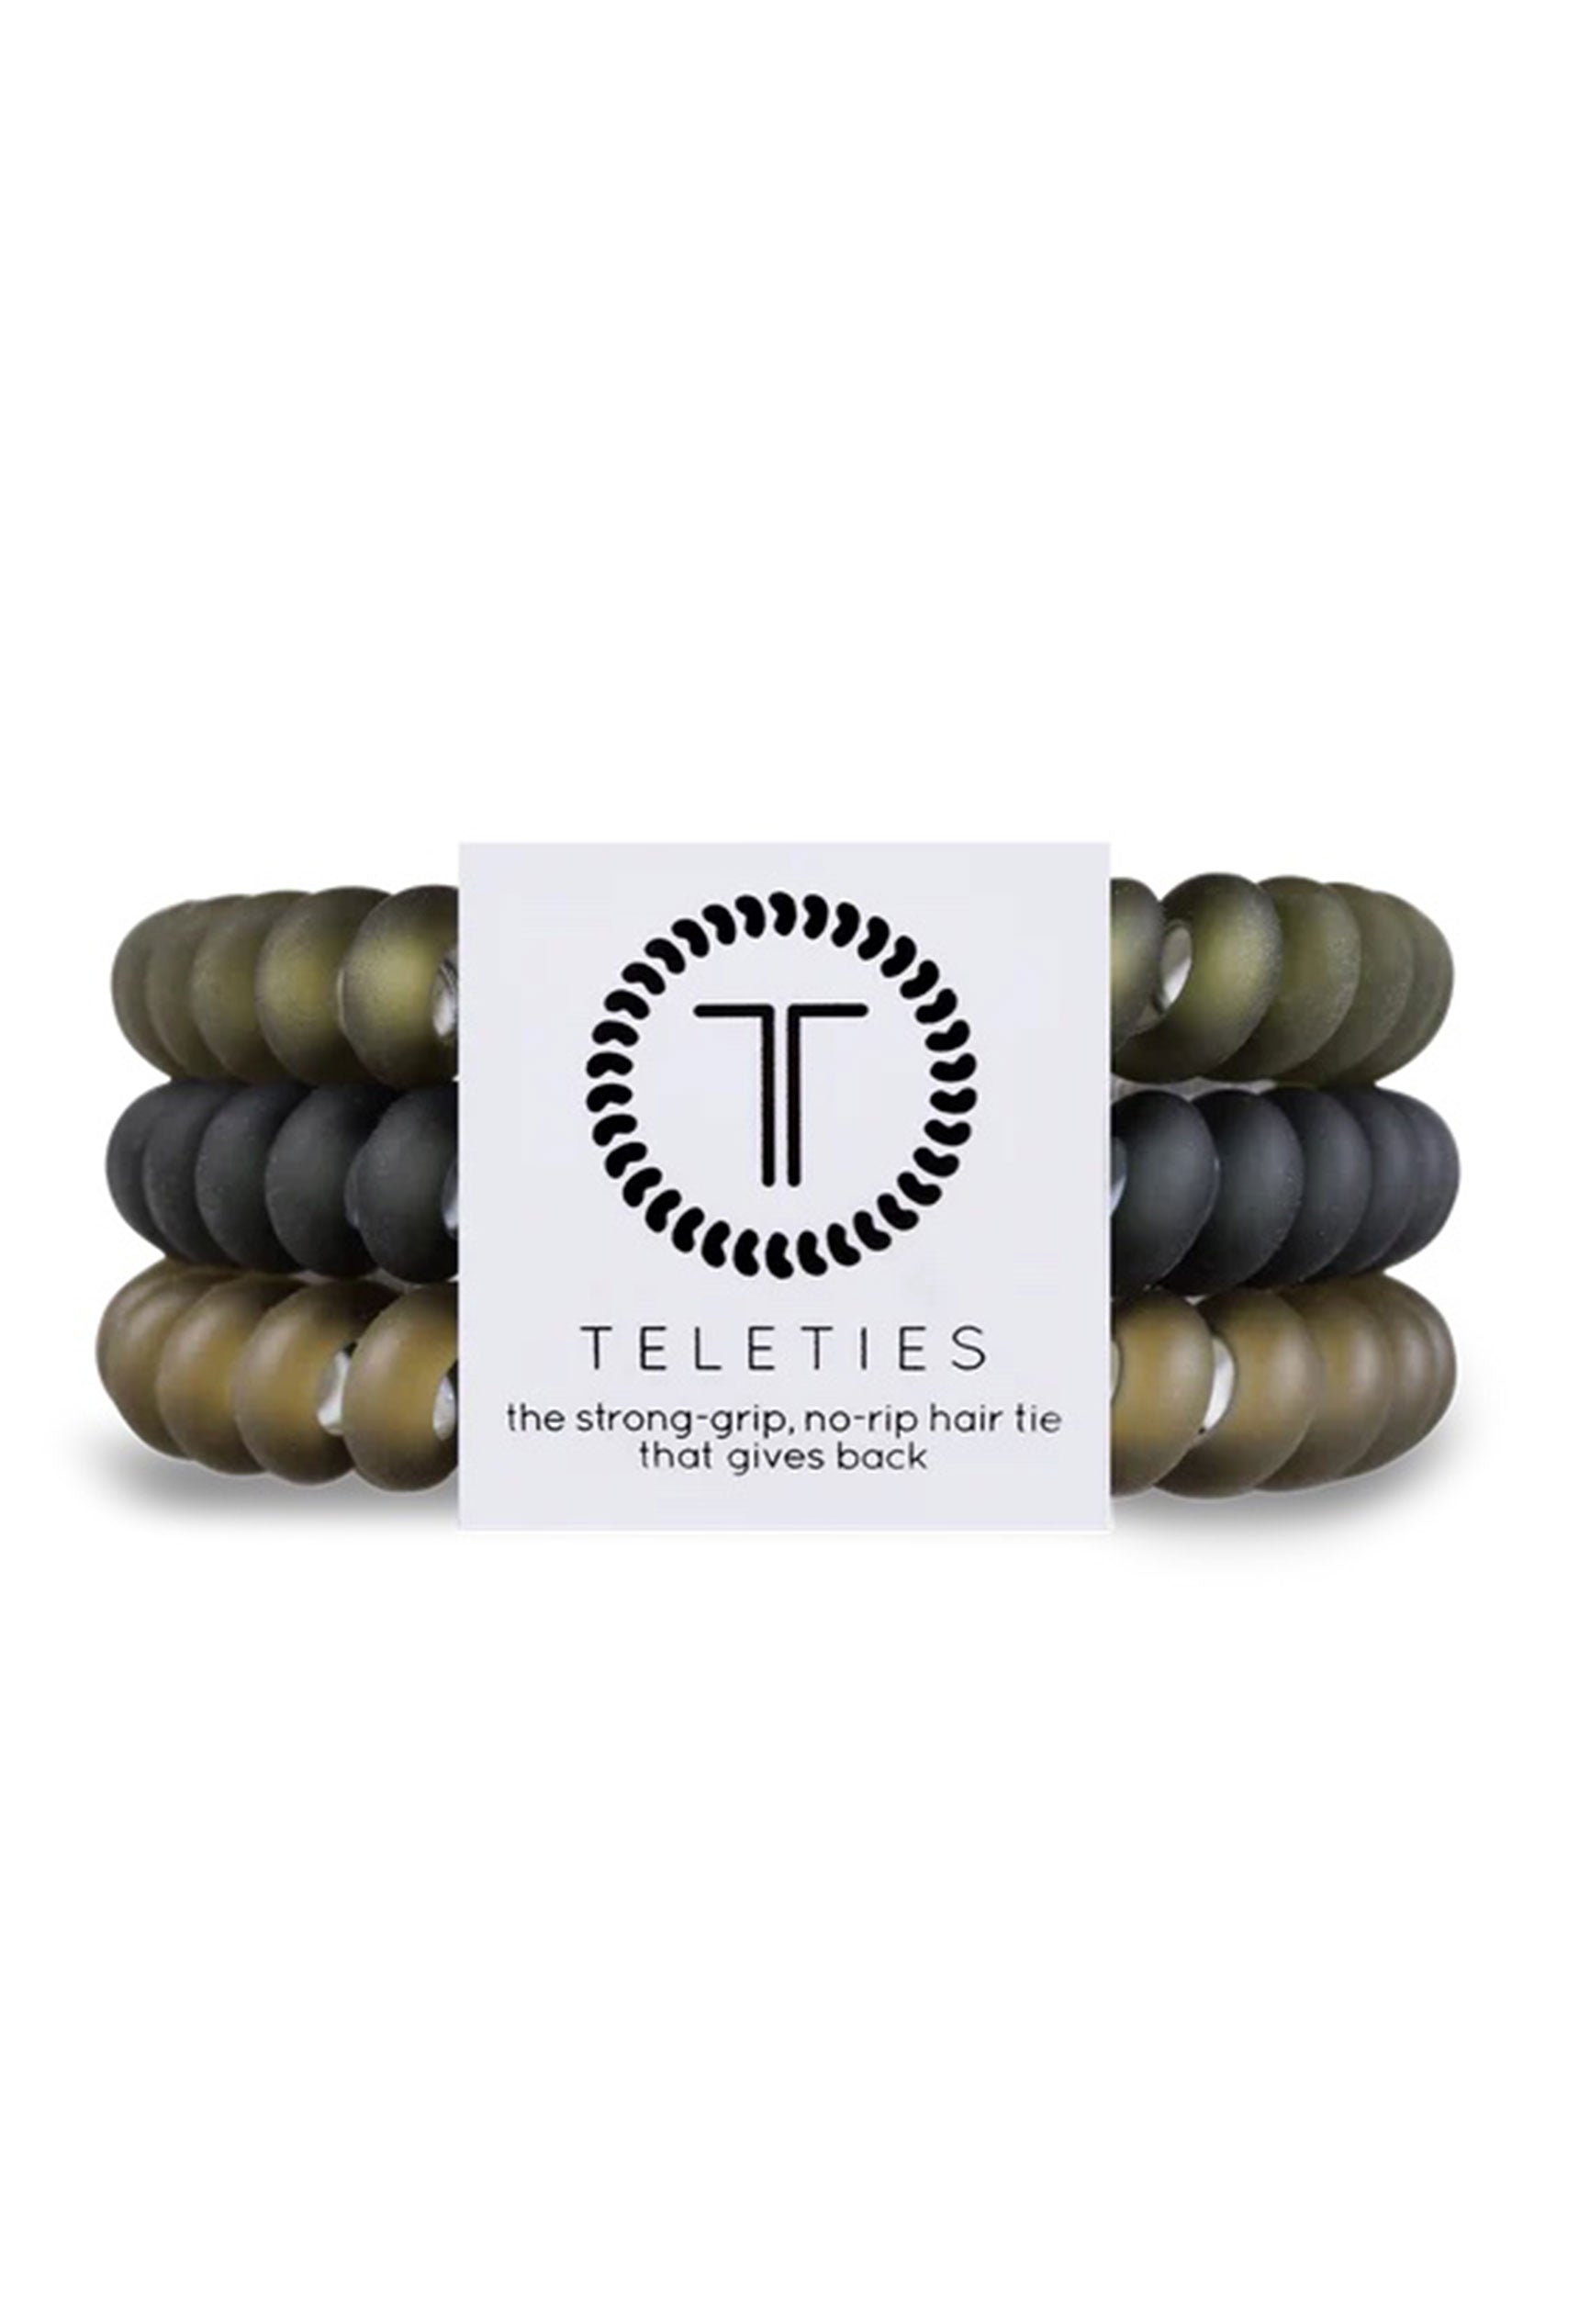 TELETIES Small Hair Ties - Cactus Green, set of 3 coil style hair tie, ombre from forest green to black